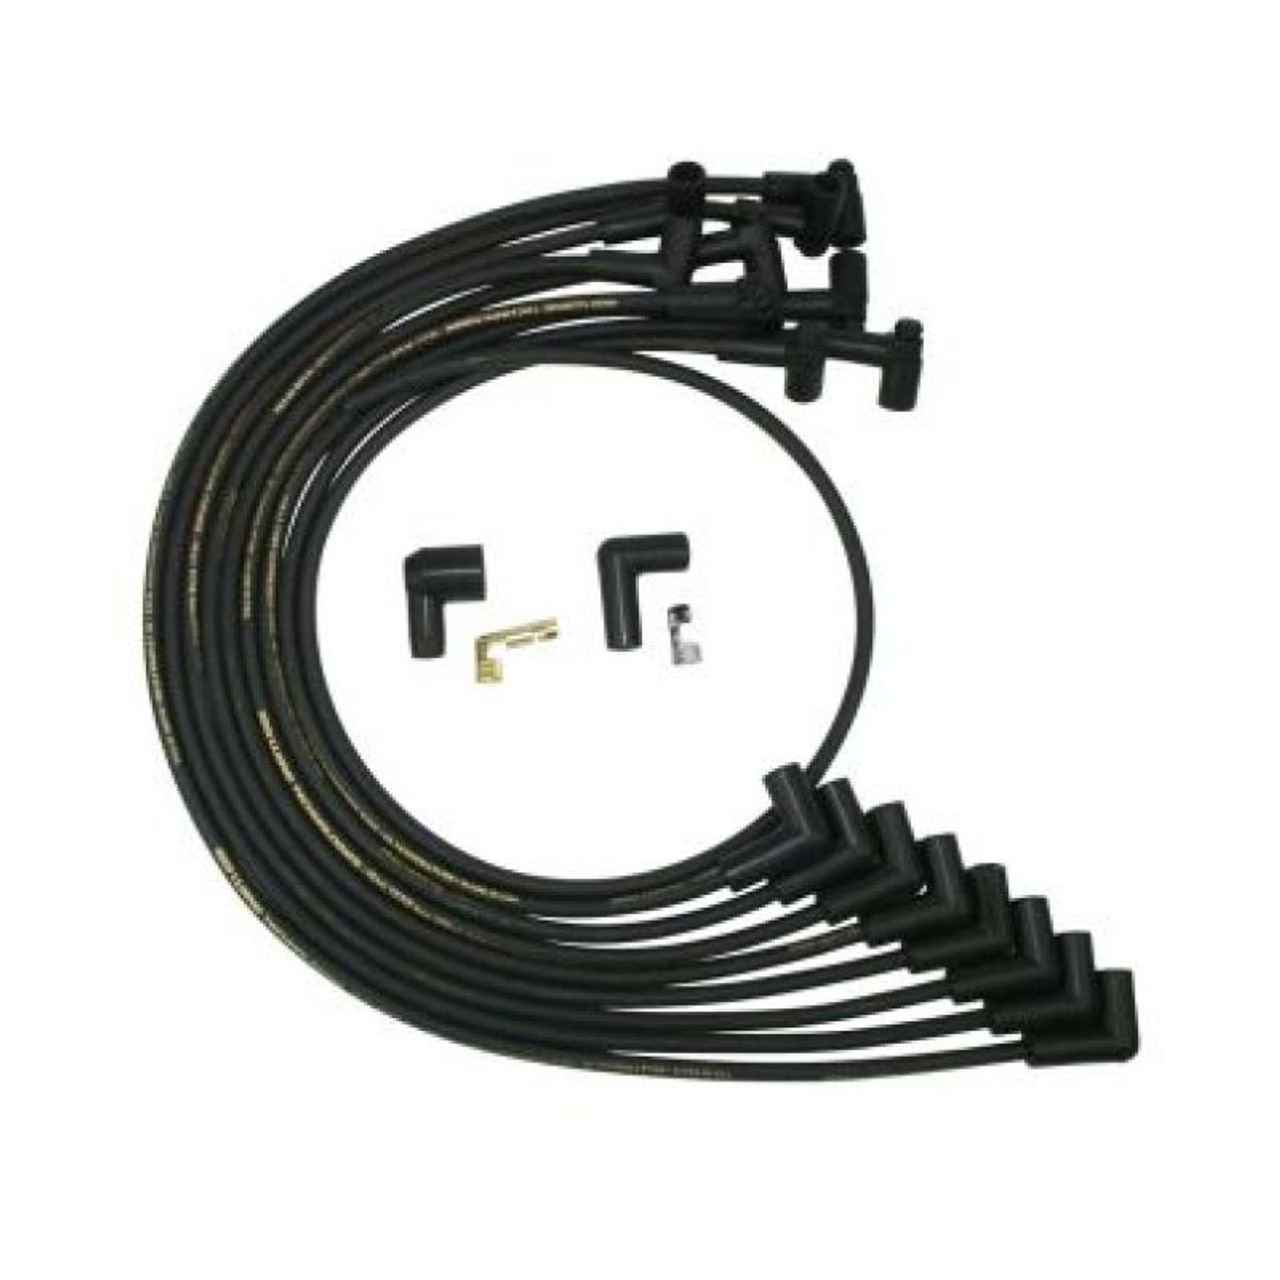 Moroso Chevrolet Small Block HEI Over V/C Unsleeved 90 Degree Mag Tune Ignition Wire Set - Black - 9862M User 1